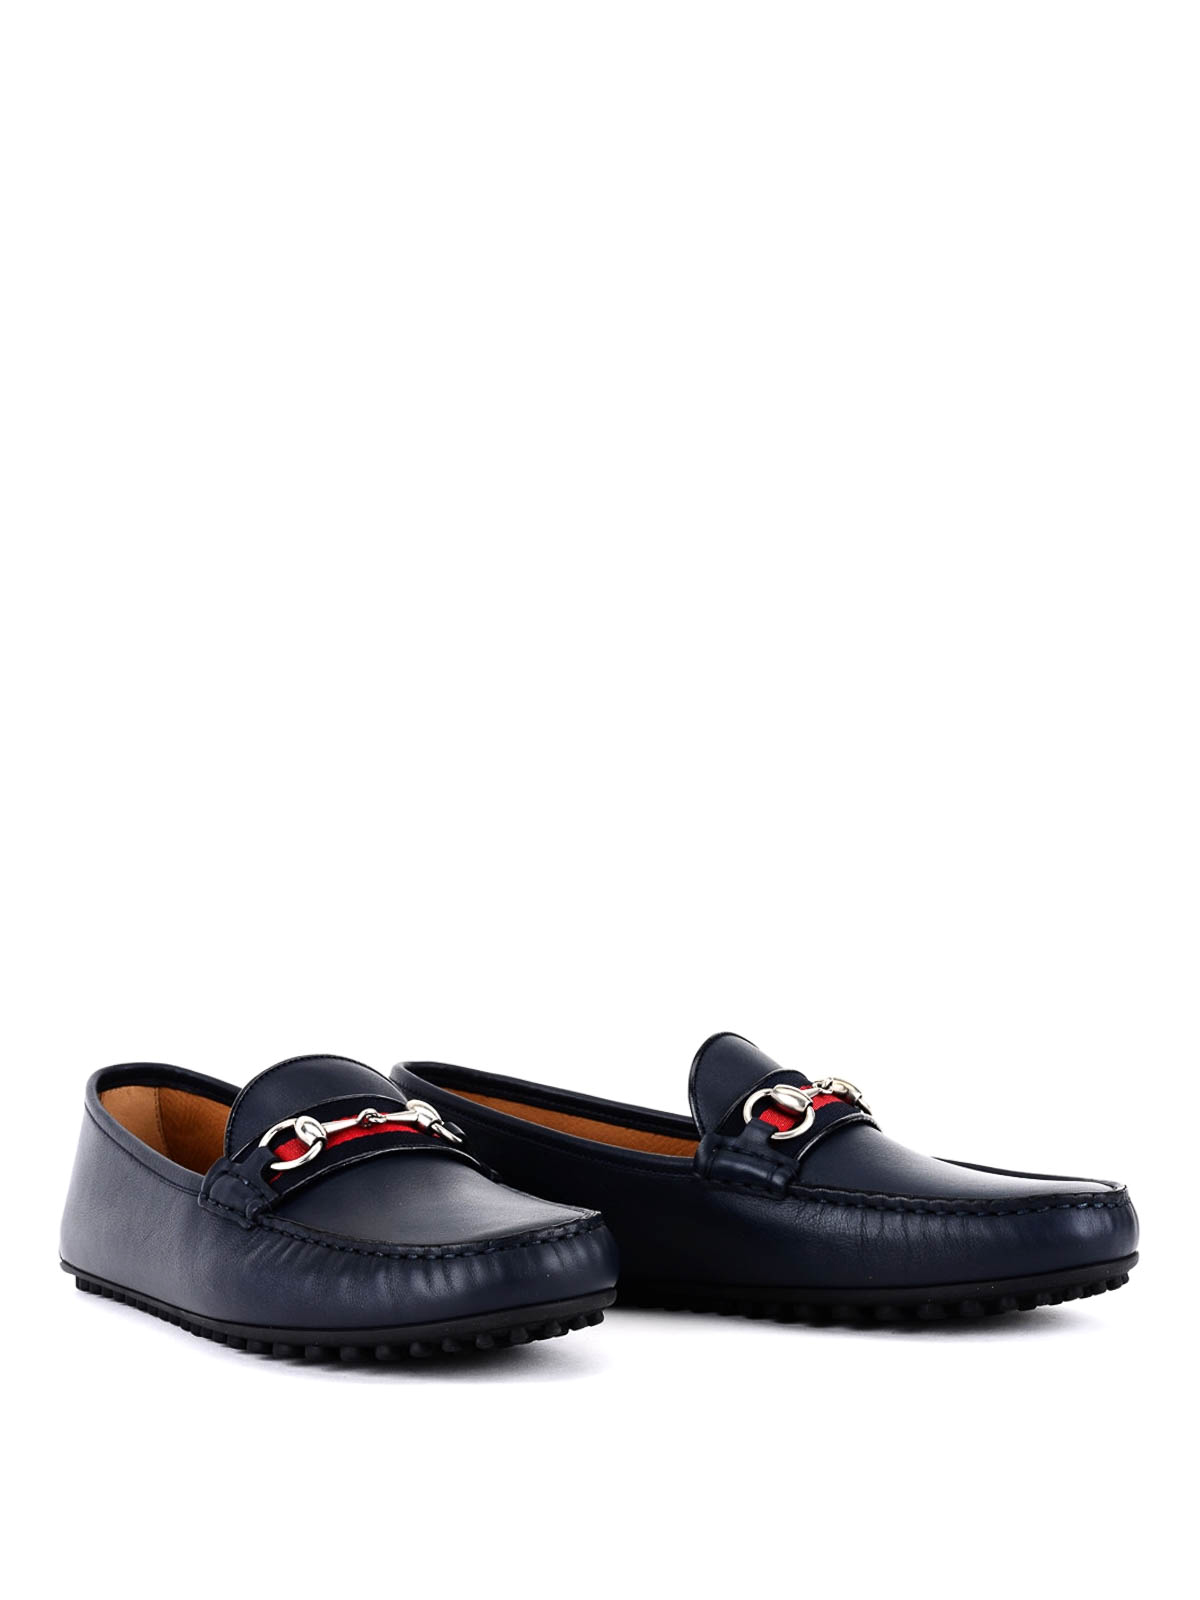 Gucci - Horsebit detail leather loafers 